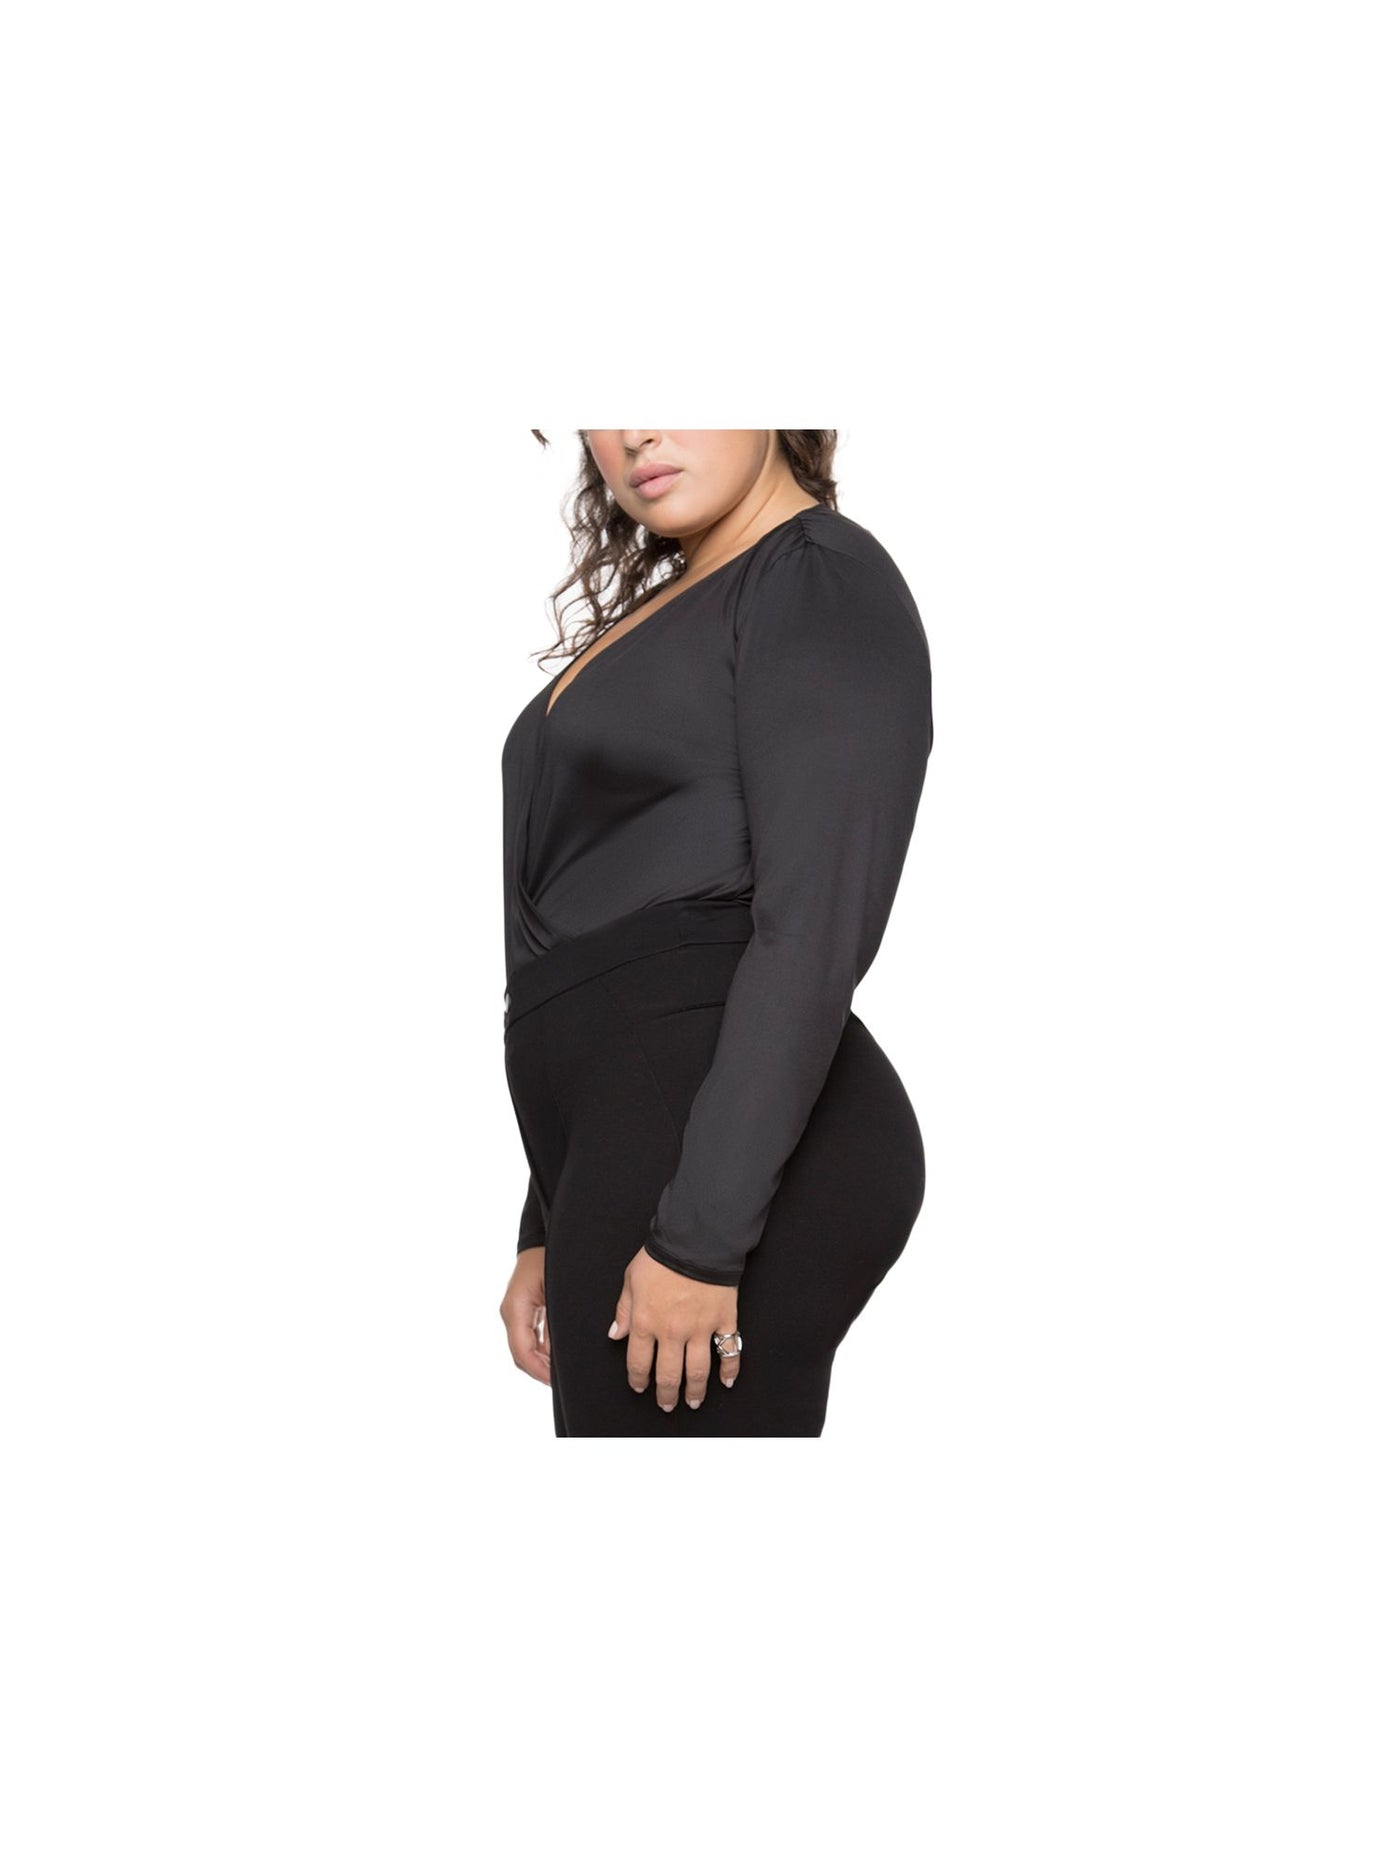 BLACK TAPE Womens Black Stretch Sheer Faux Wrap Style Long Sleeve Body Suit Top Plus 2X